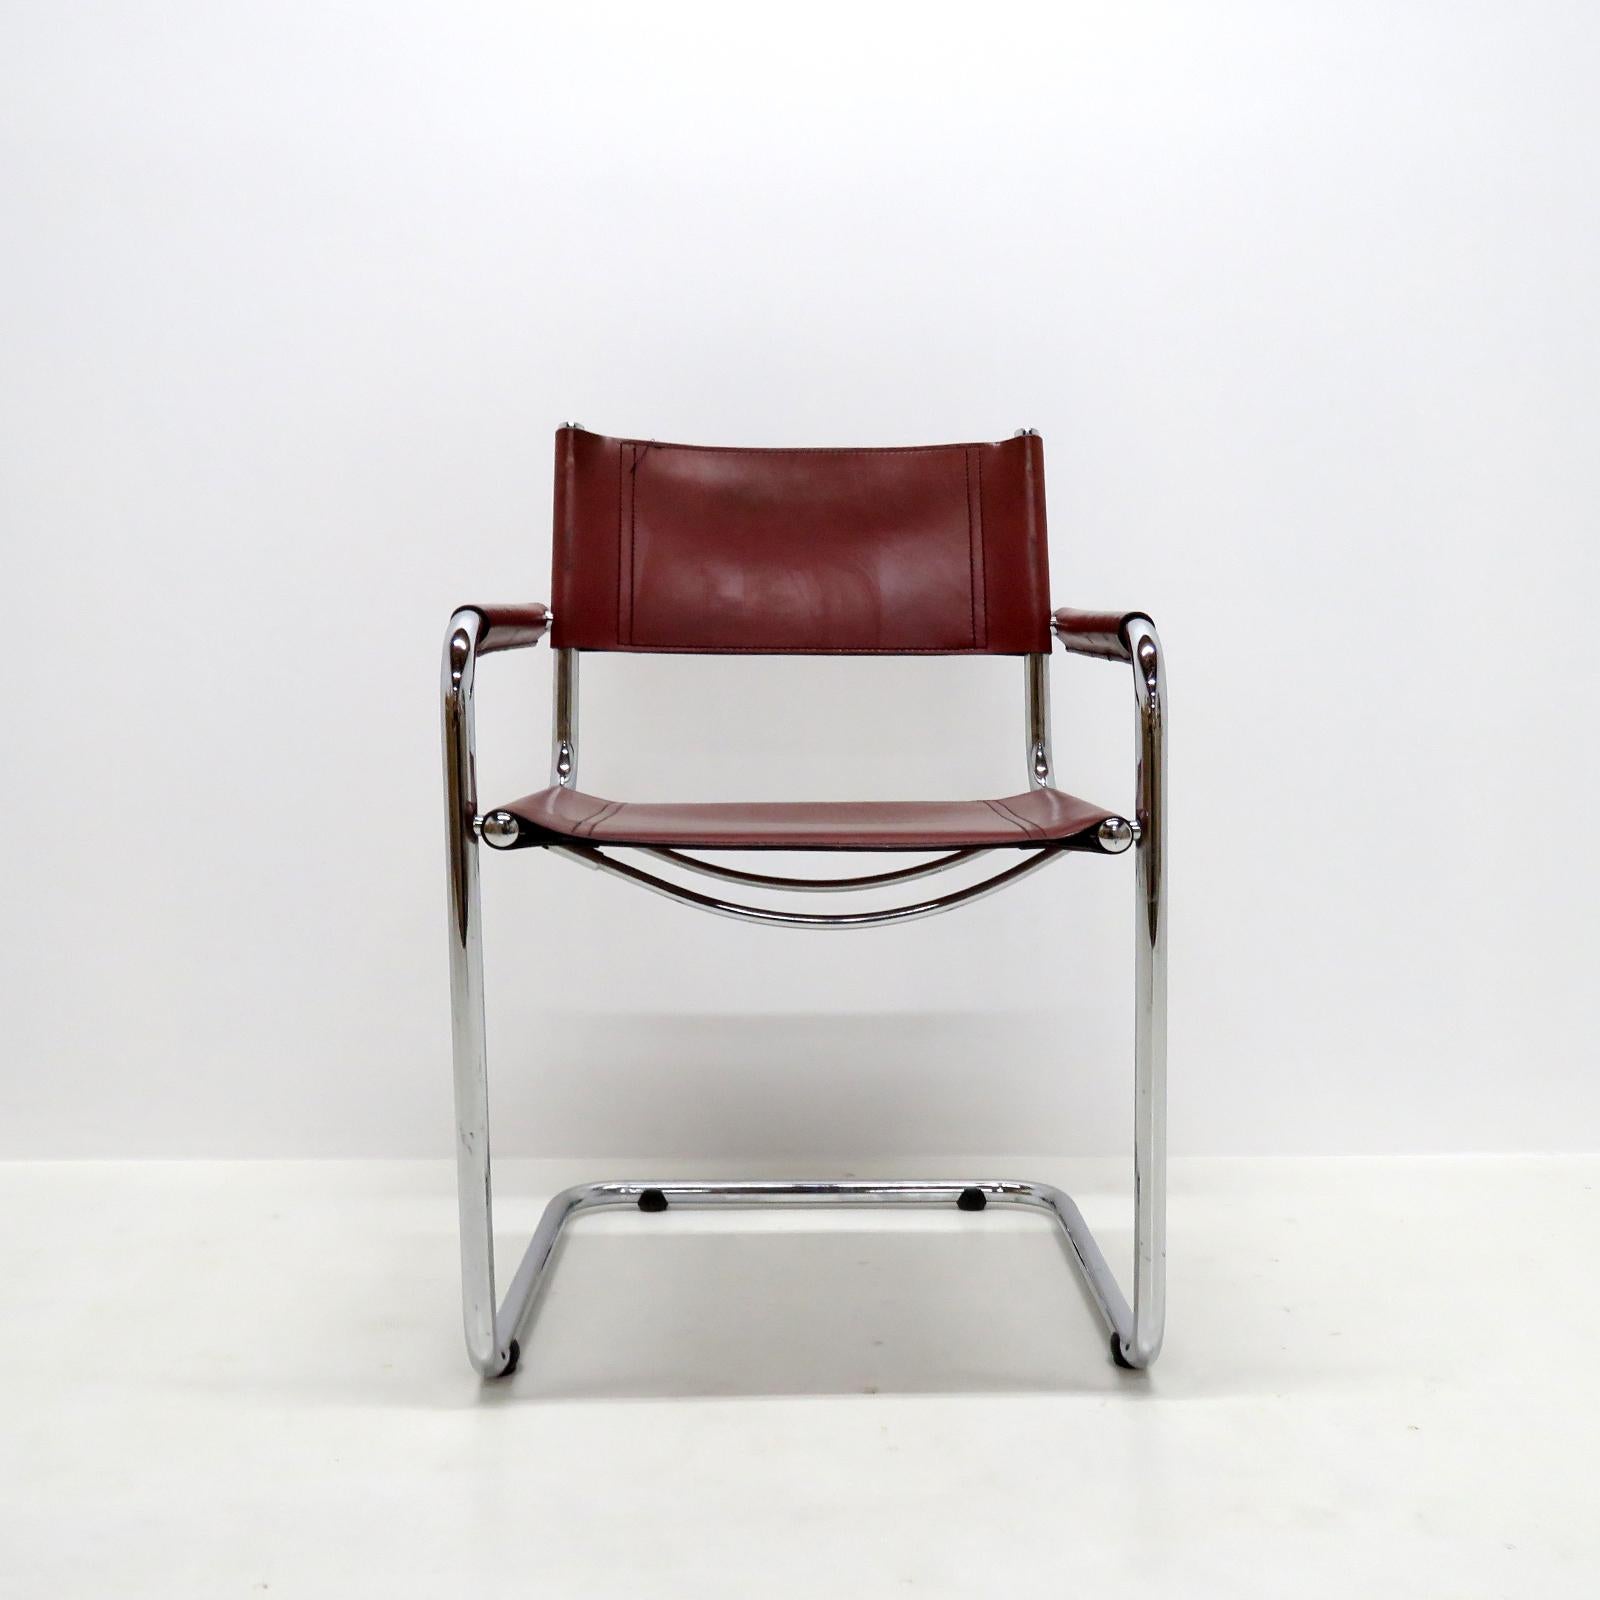 Wonderful dining chairs Model S33 by Mart Stam for Fasem International, Italy, 1981, with ox blood red leather on tubular chrome plated steel frames, nice patina and very comfortable. Priced individually.